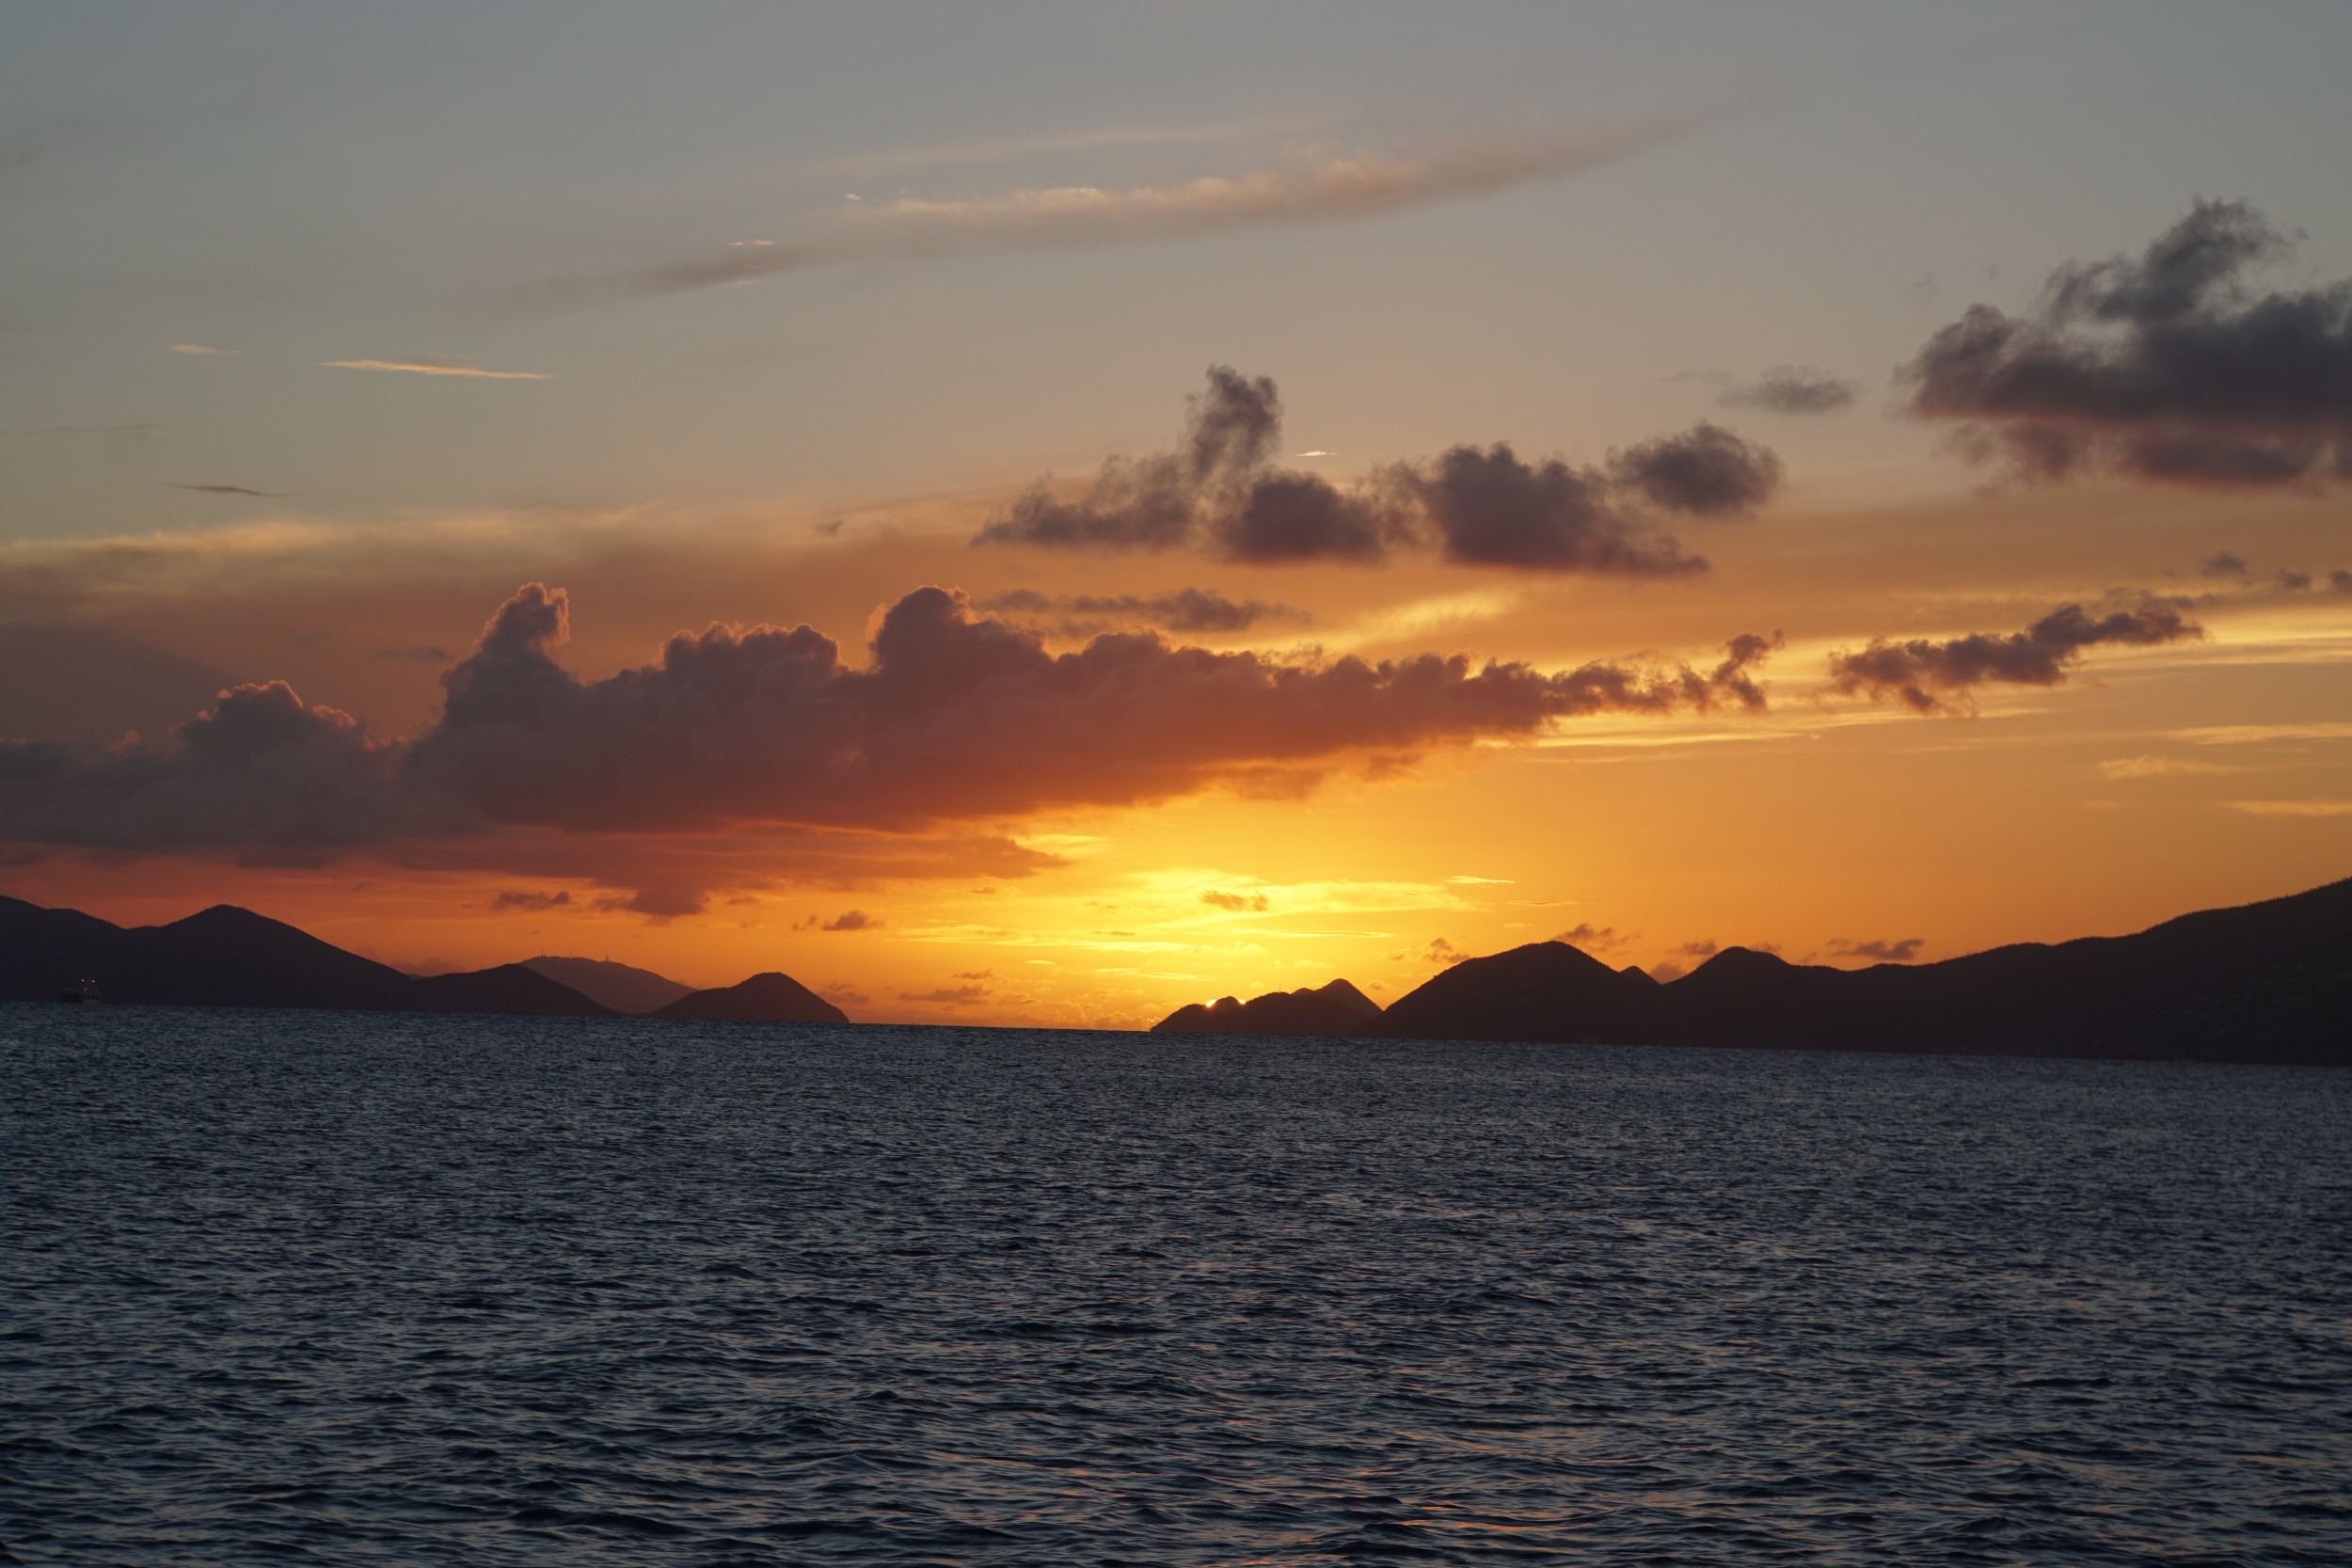 67. Sunset on our time in the Virgin Islands